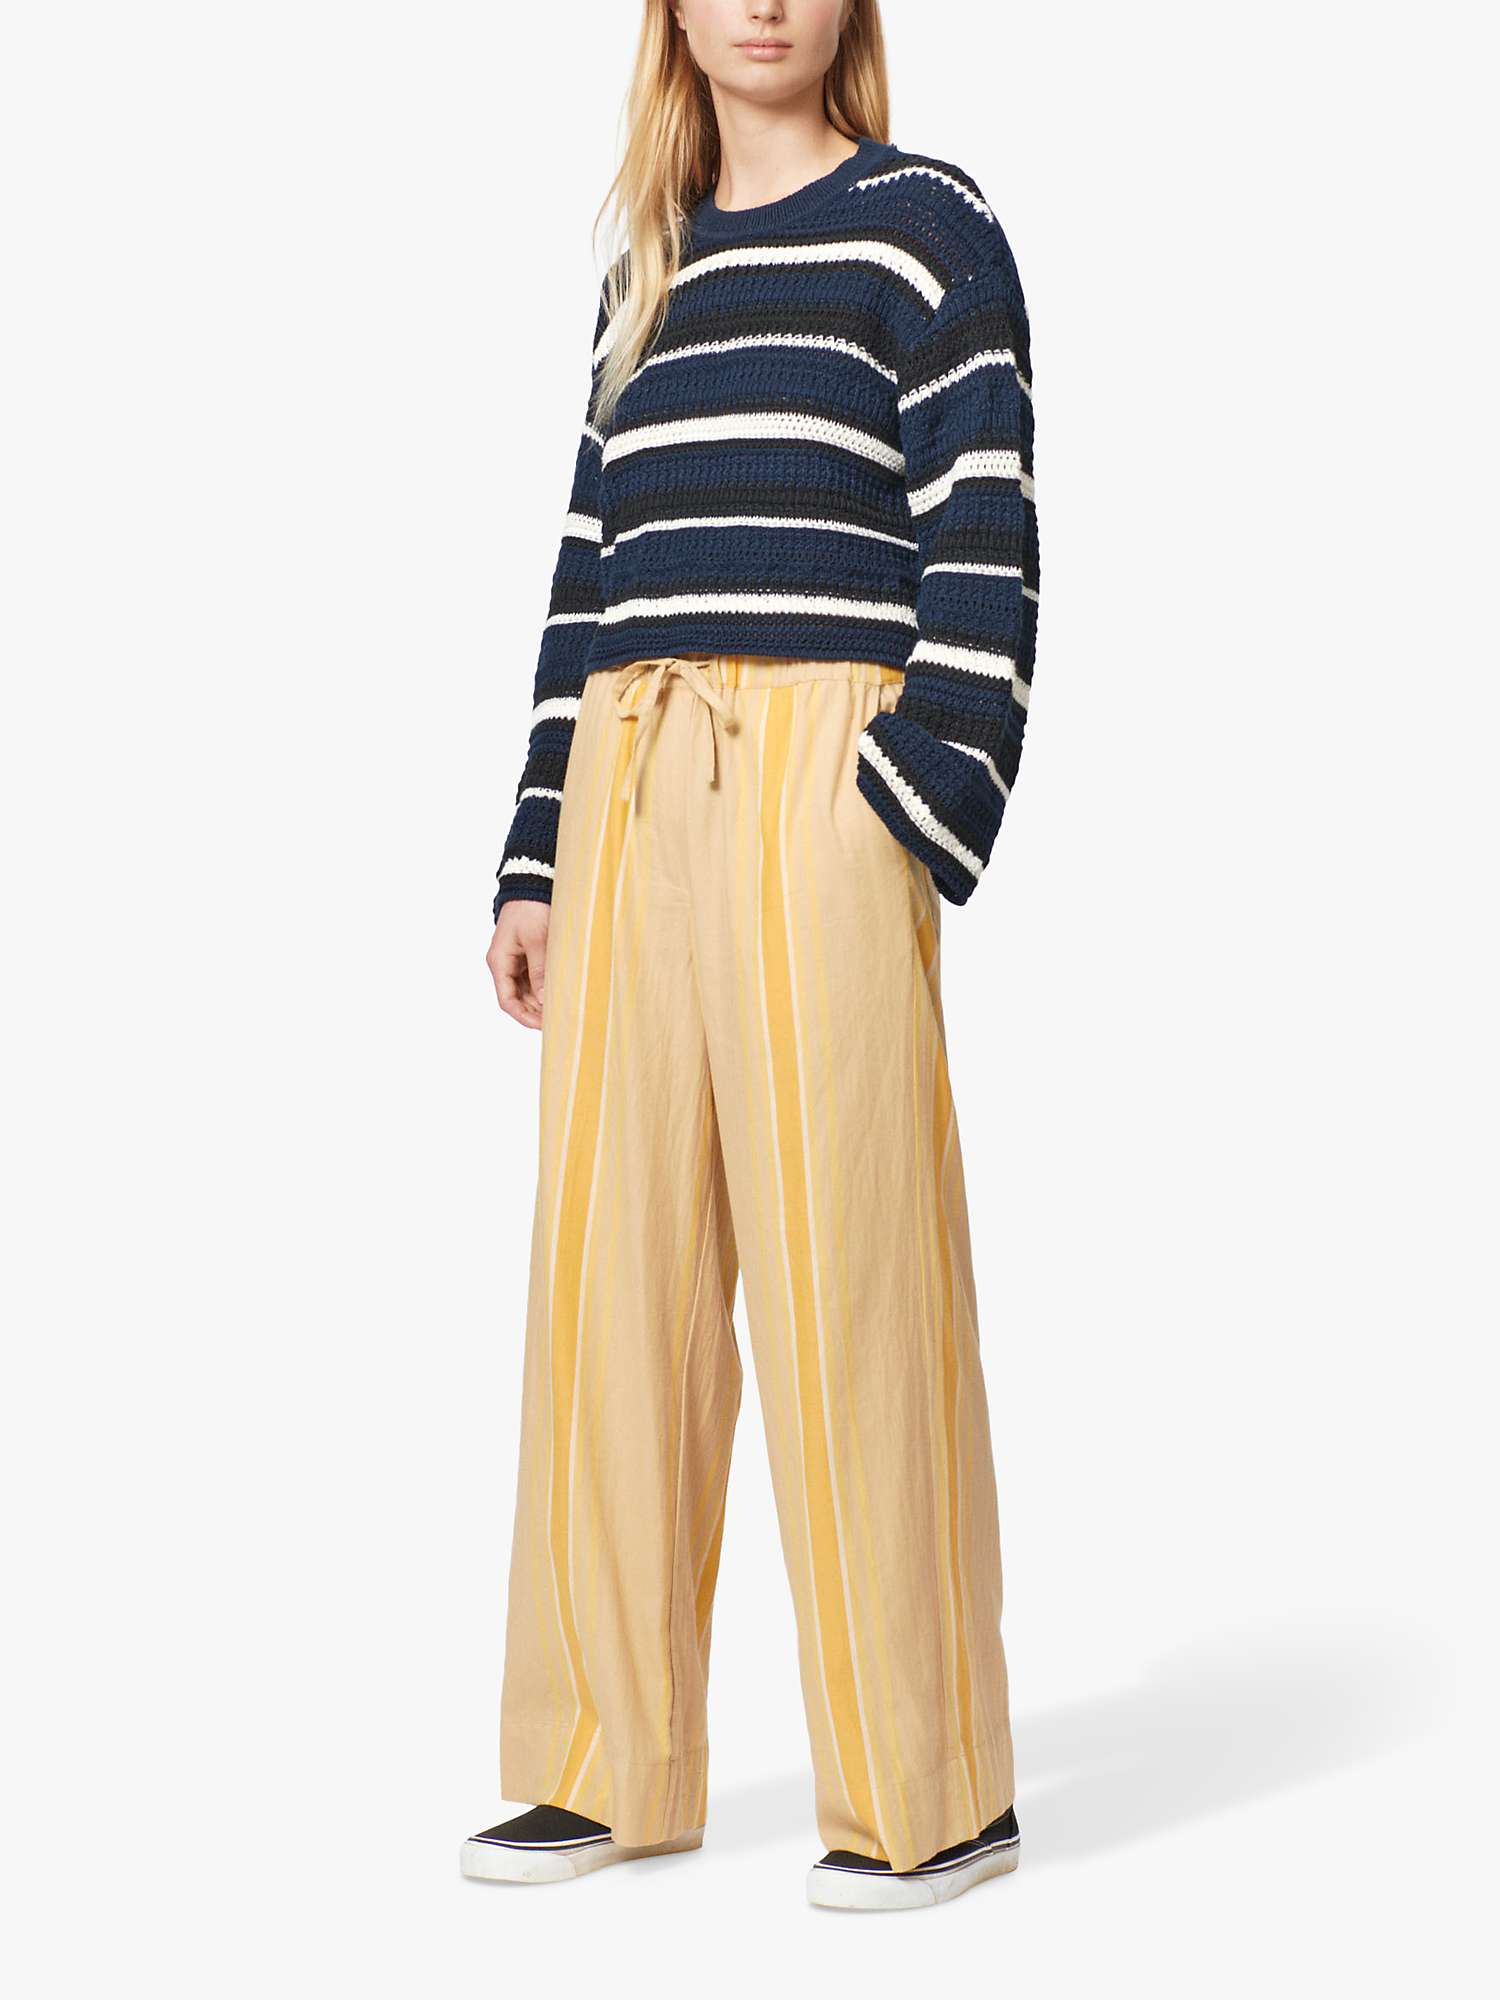 Buy nué notes Waymond Striped Cropped Crochet Jumper, Midnight Online at johnlewis.com